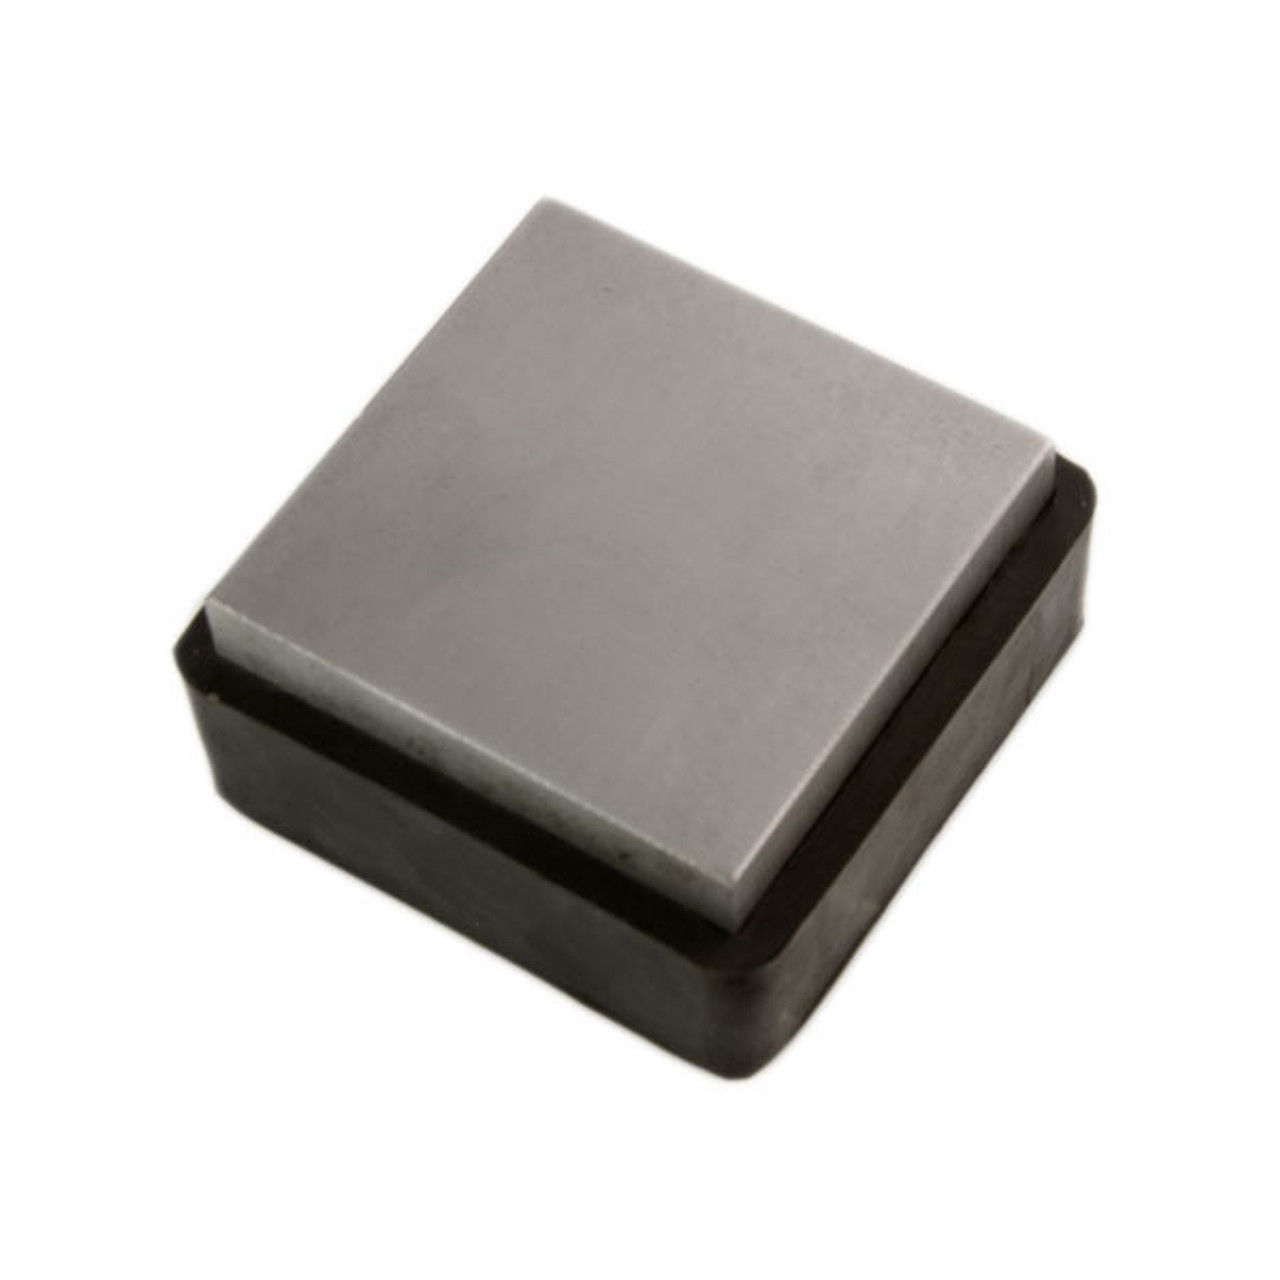 Bench Block 2.7X2.7 Steel with rubber base - SJ Jewelry Supply